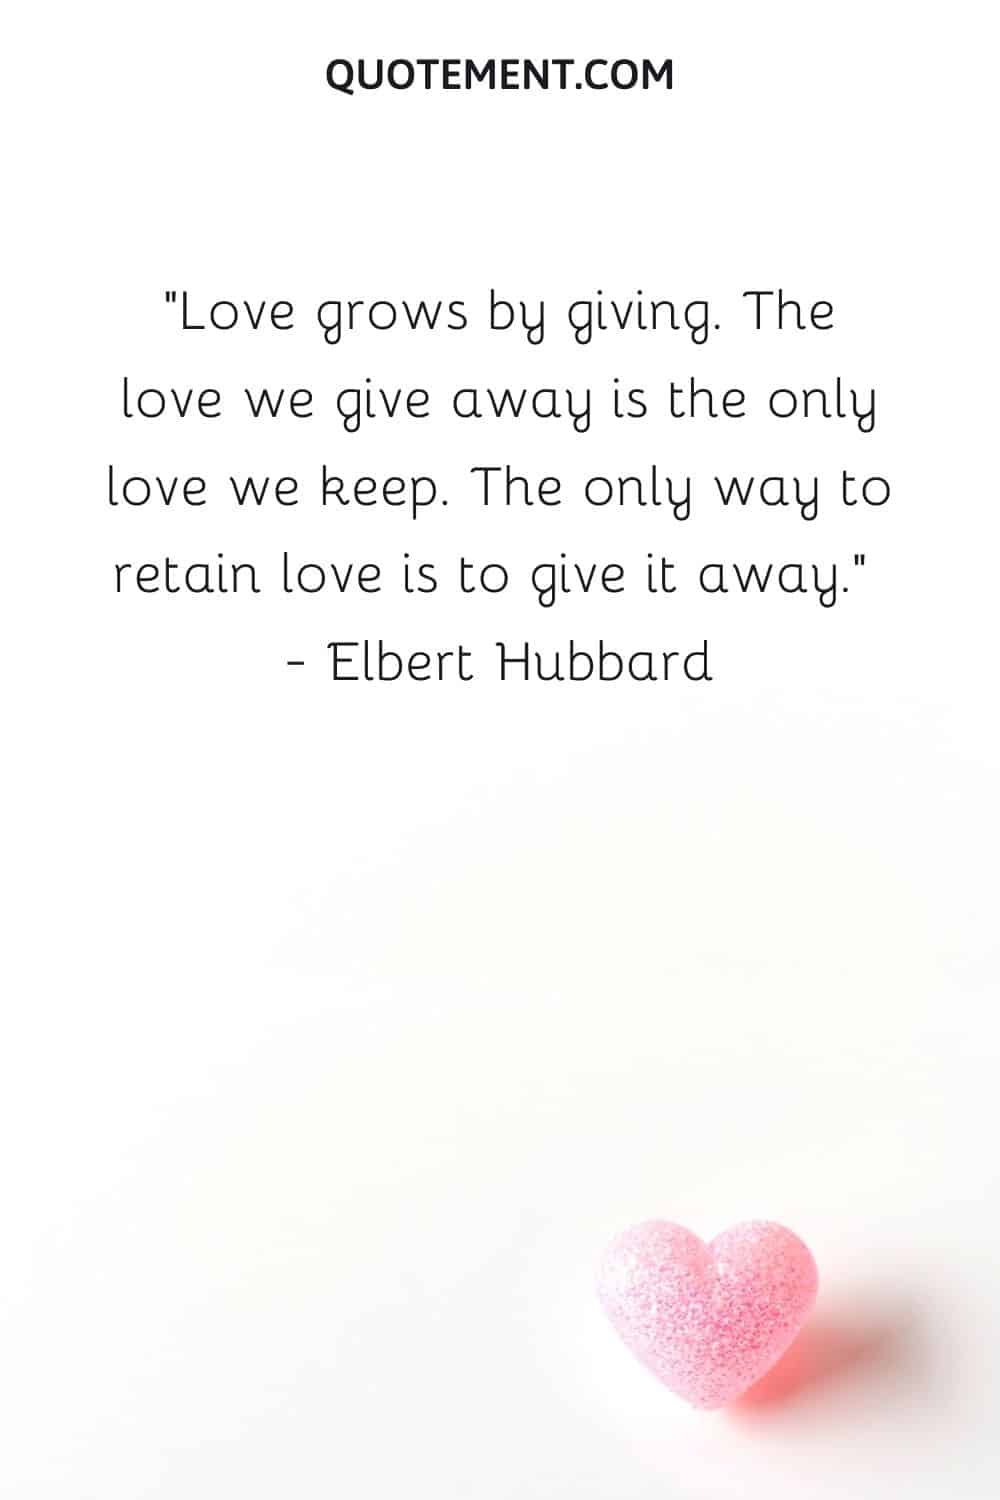 Love grows by giving.